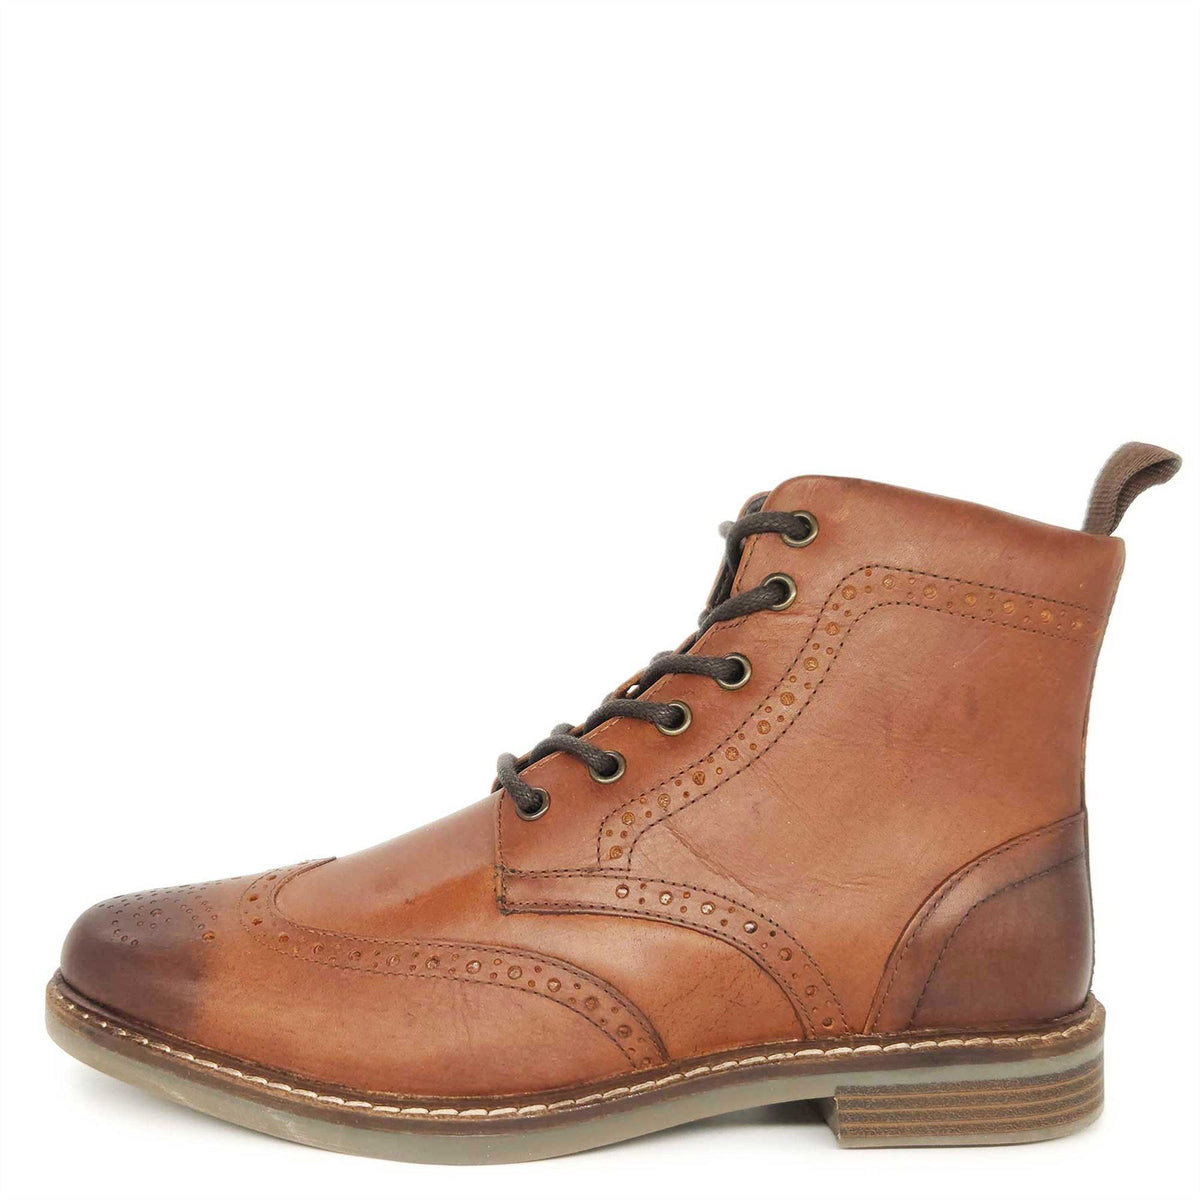 Red Tape Crick Dixon Men's Leather Lace Up Brogue Boots